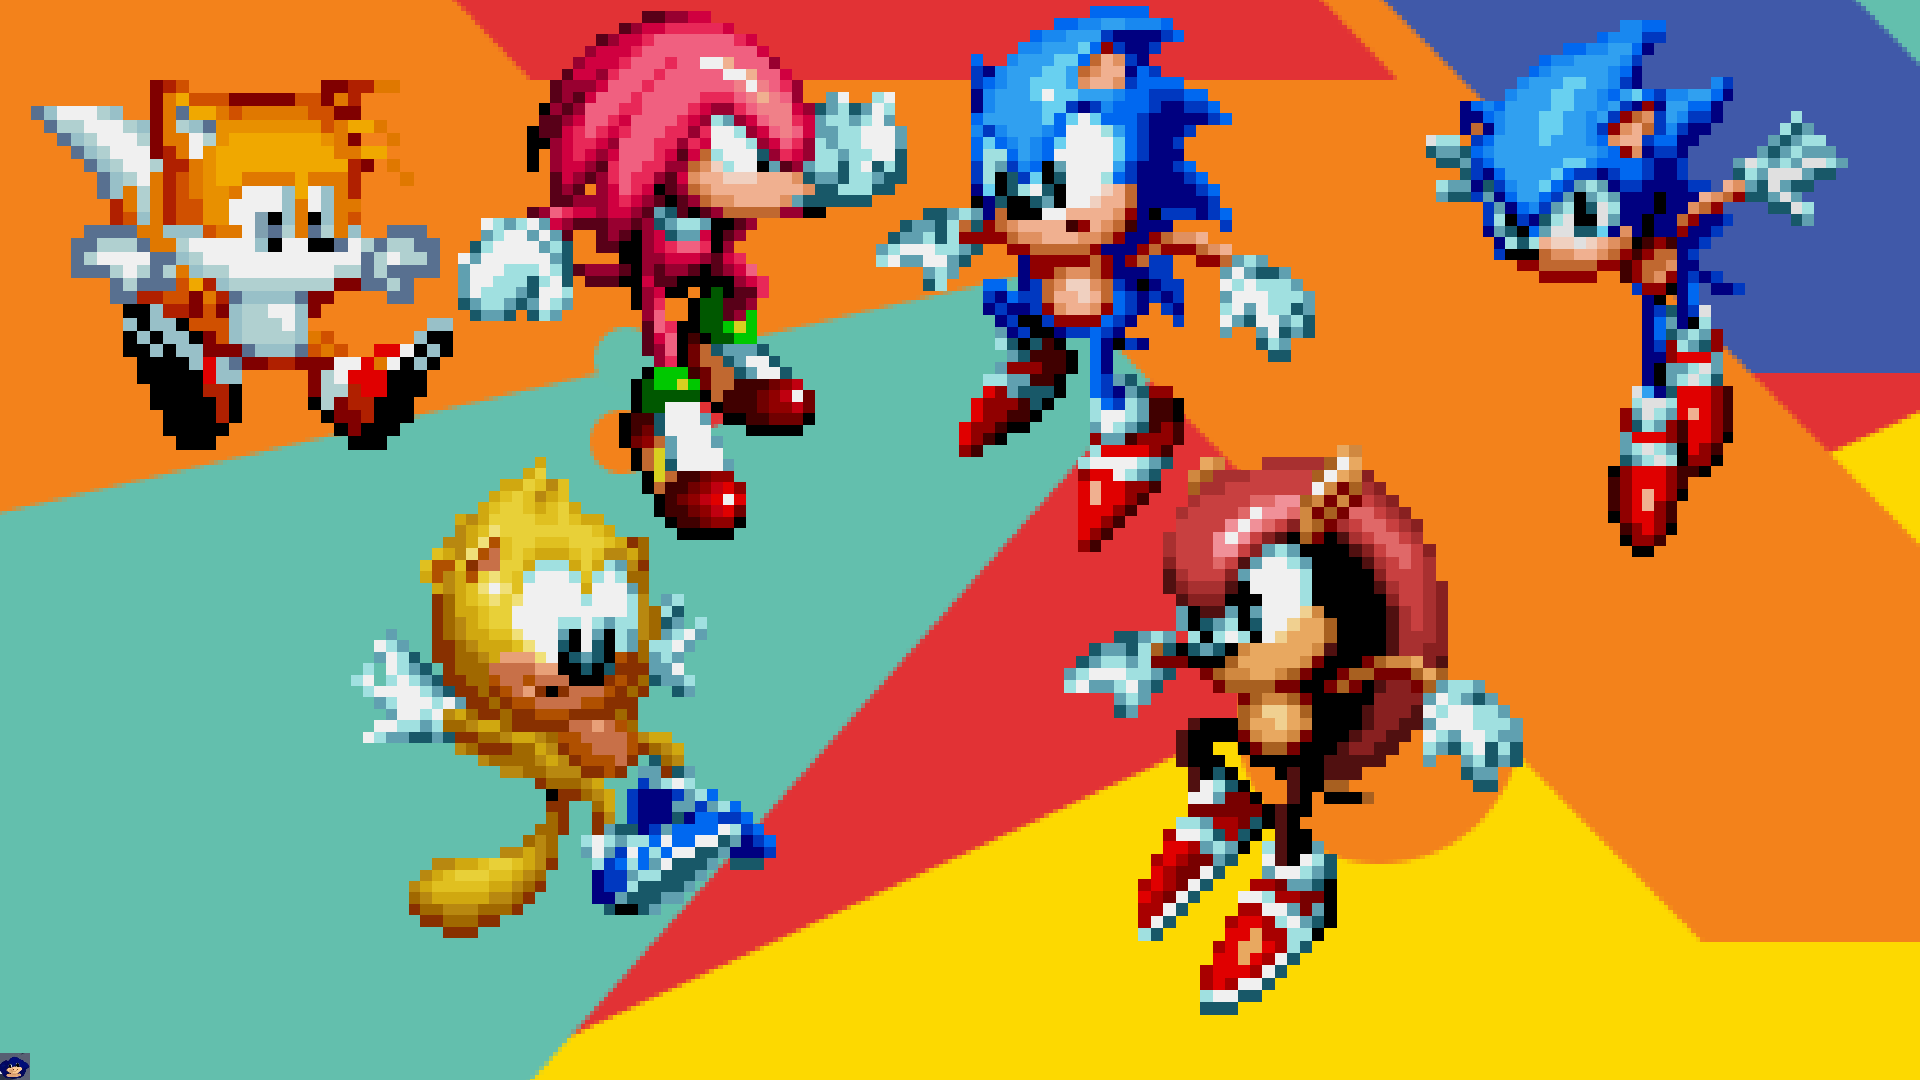 Tails.EXE and Very Hard Mode Mania Plus Mod 